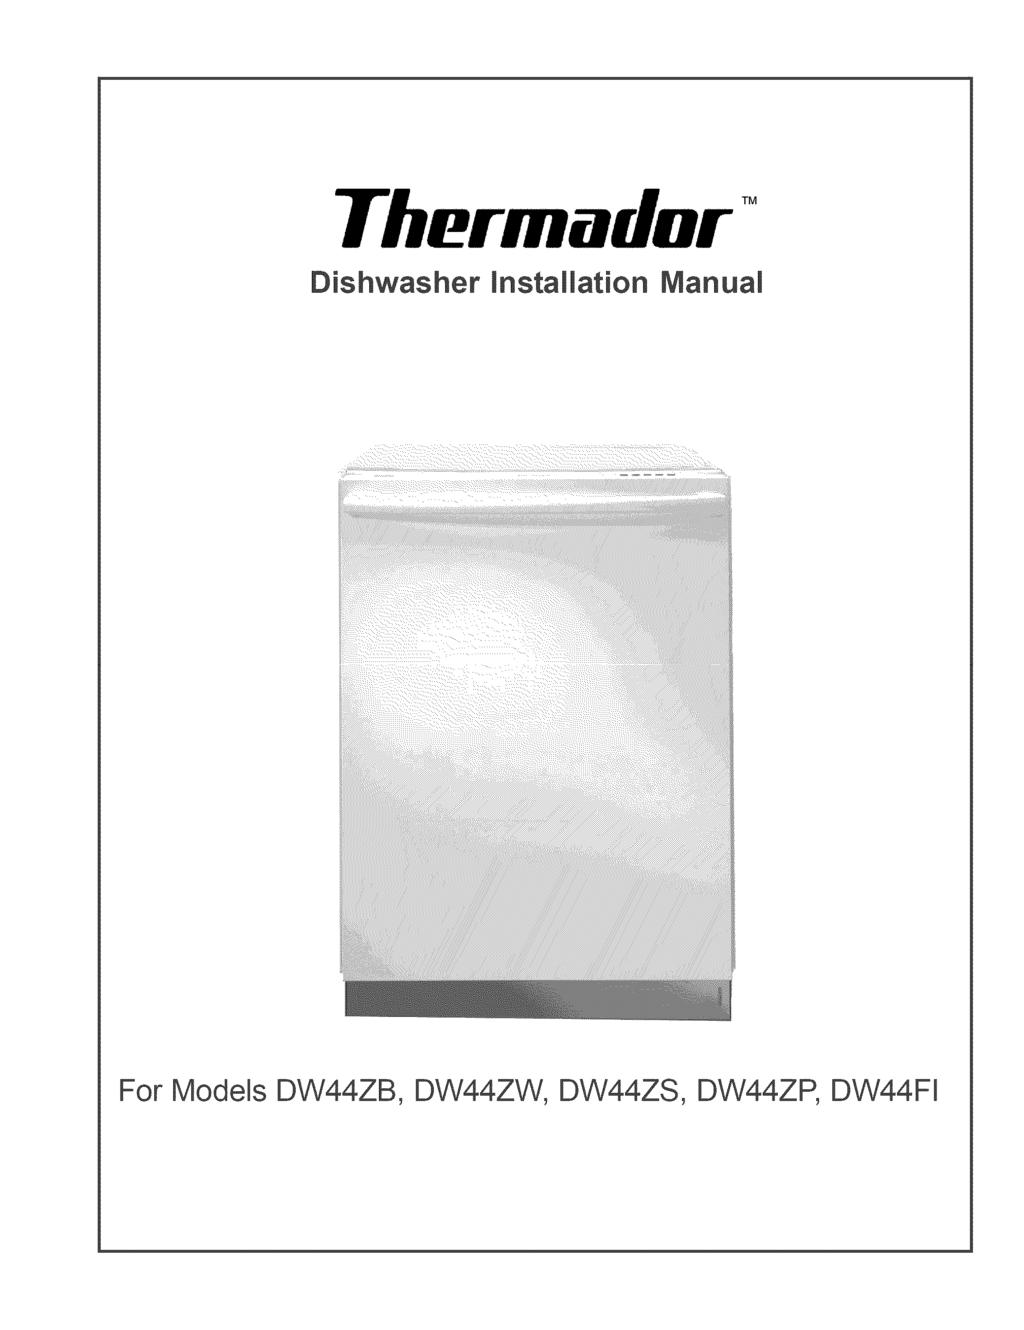 Thermador Dishwasher Installation Manual For